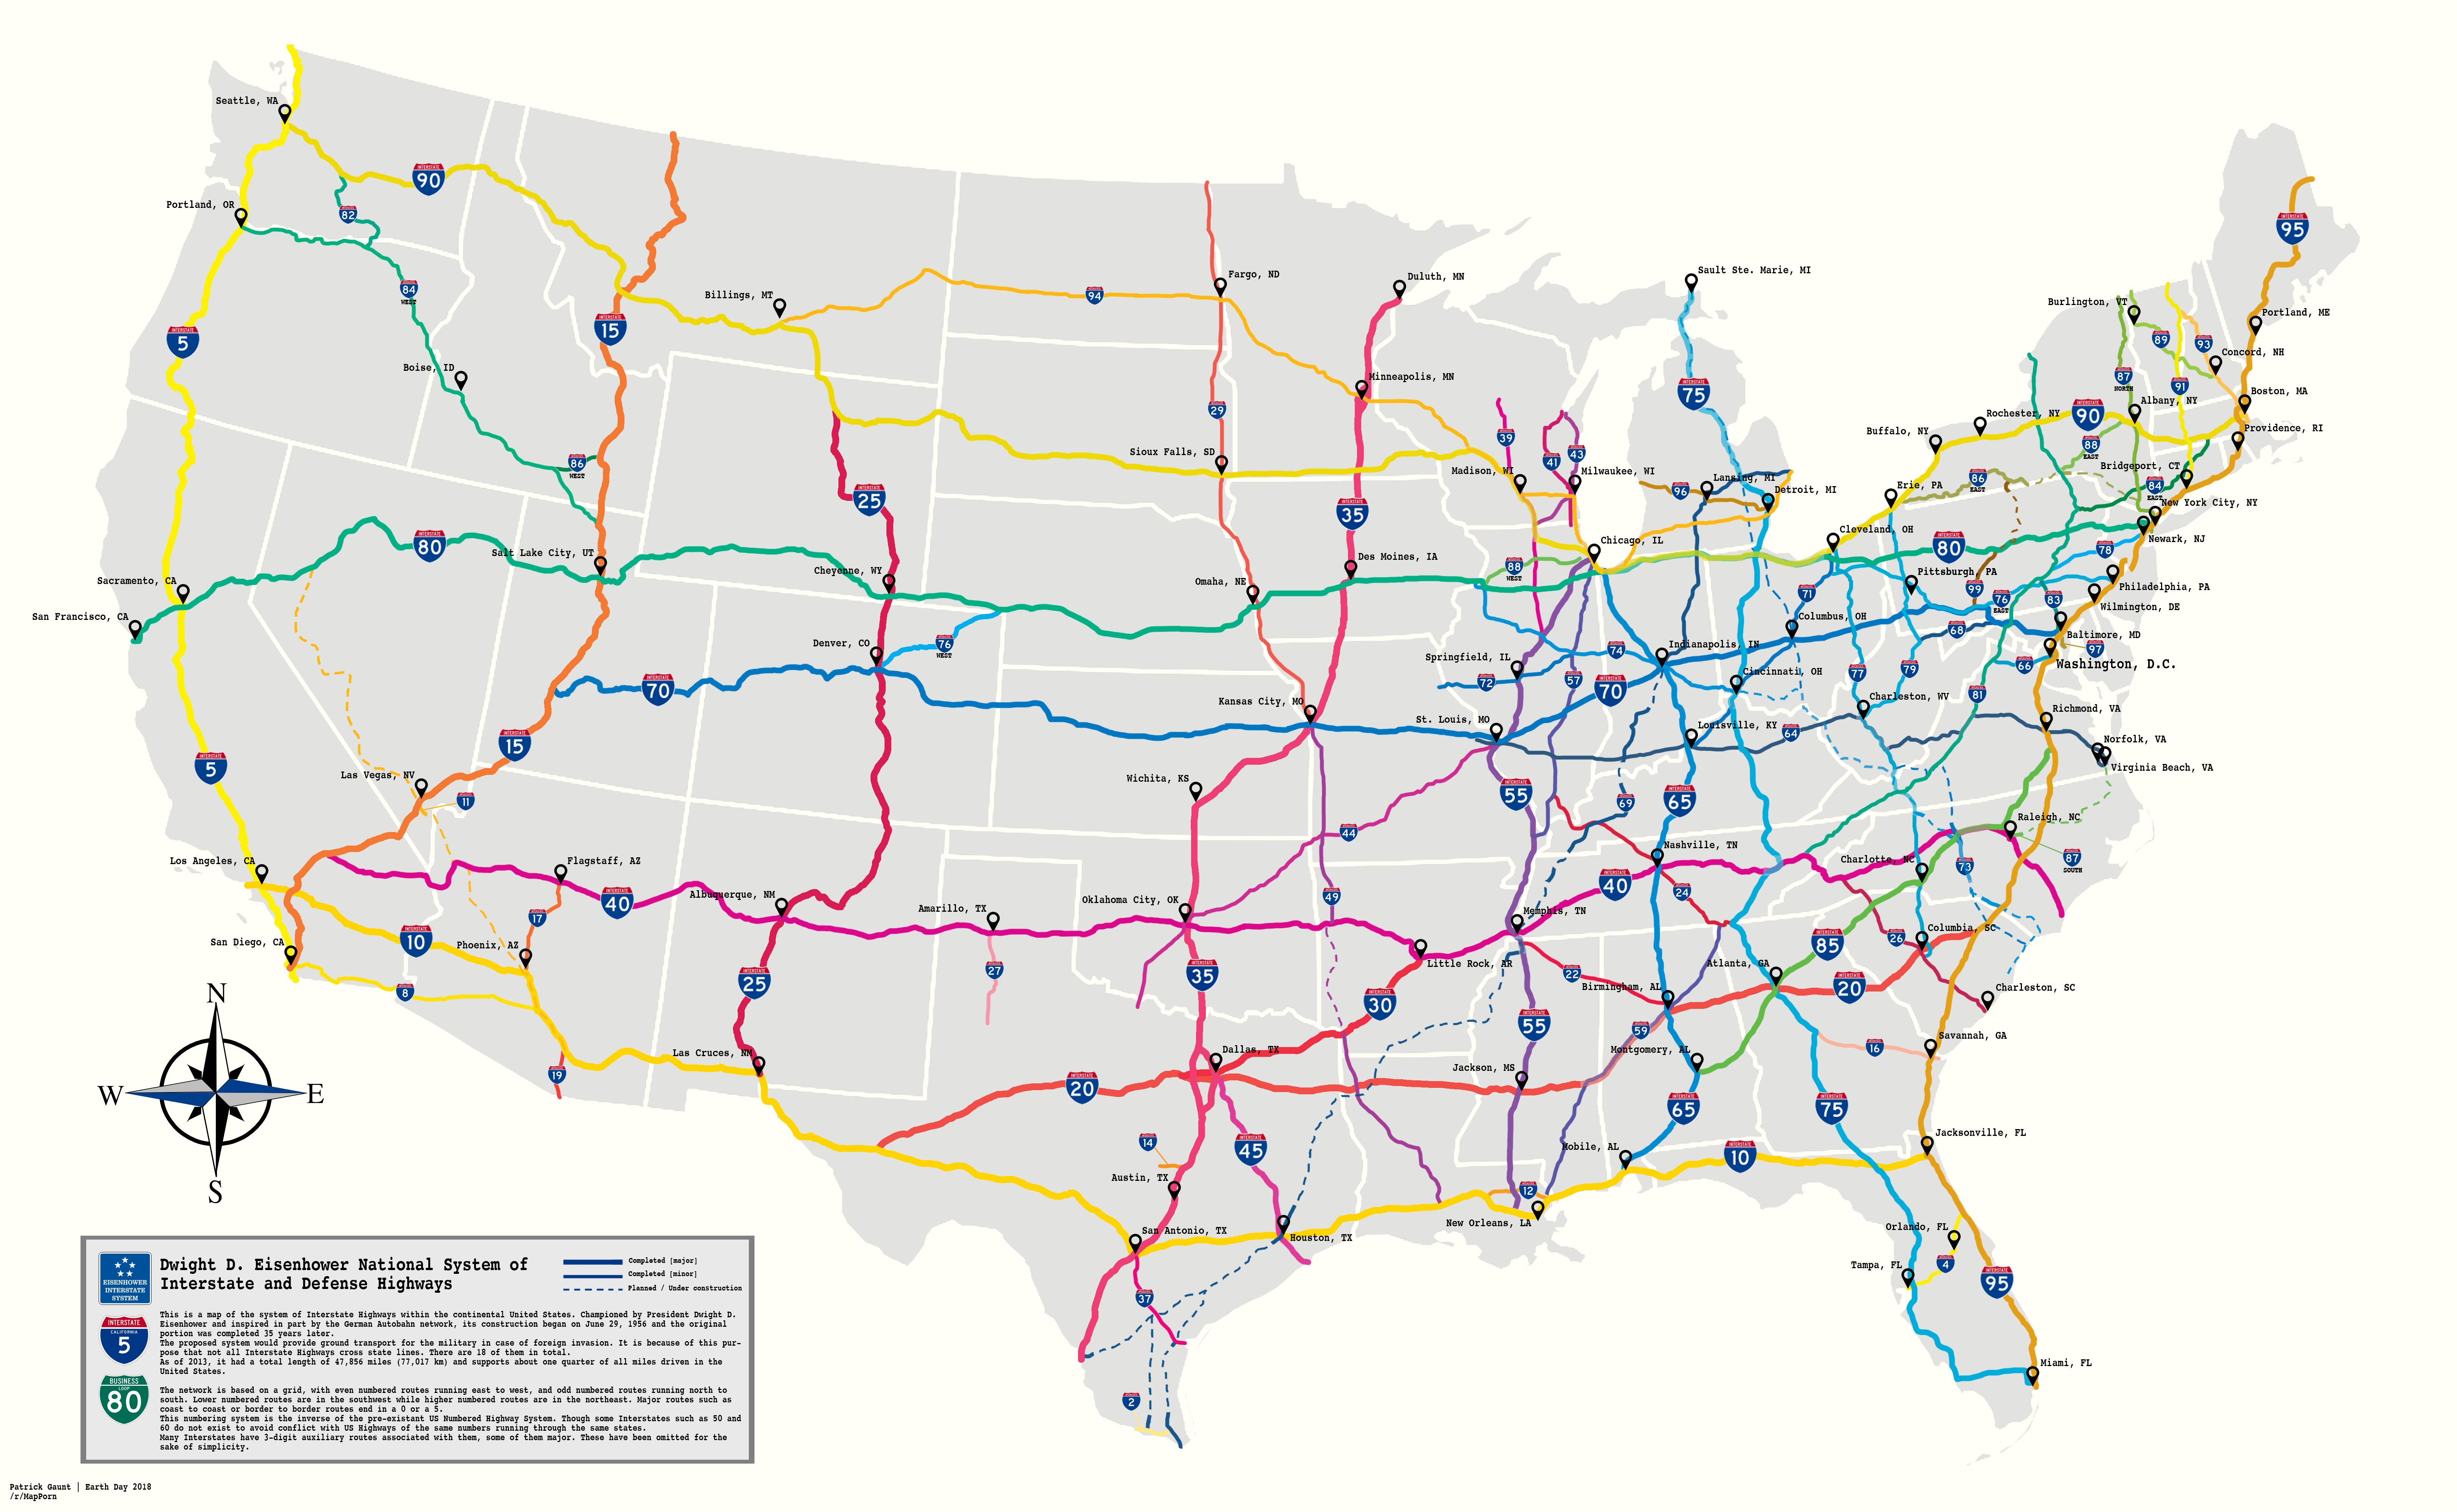 Map of the Highway Network in the US